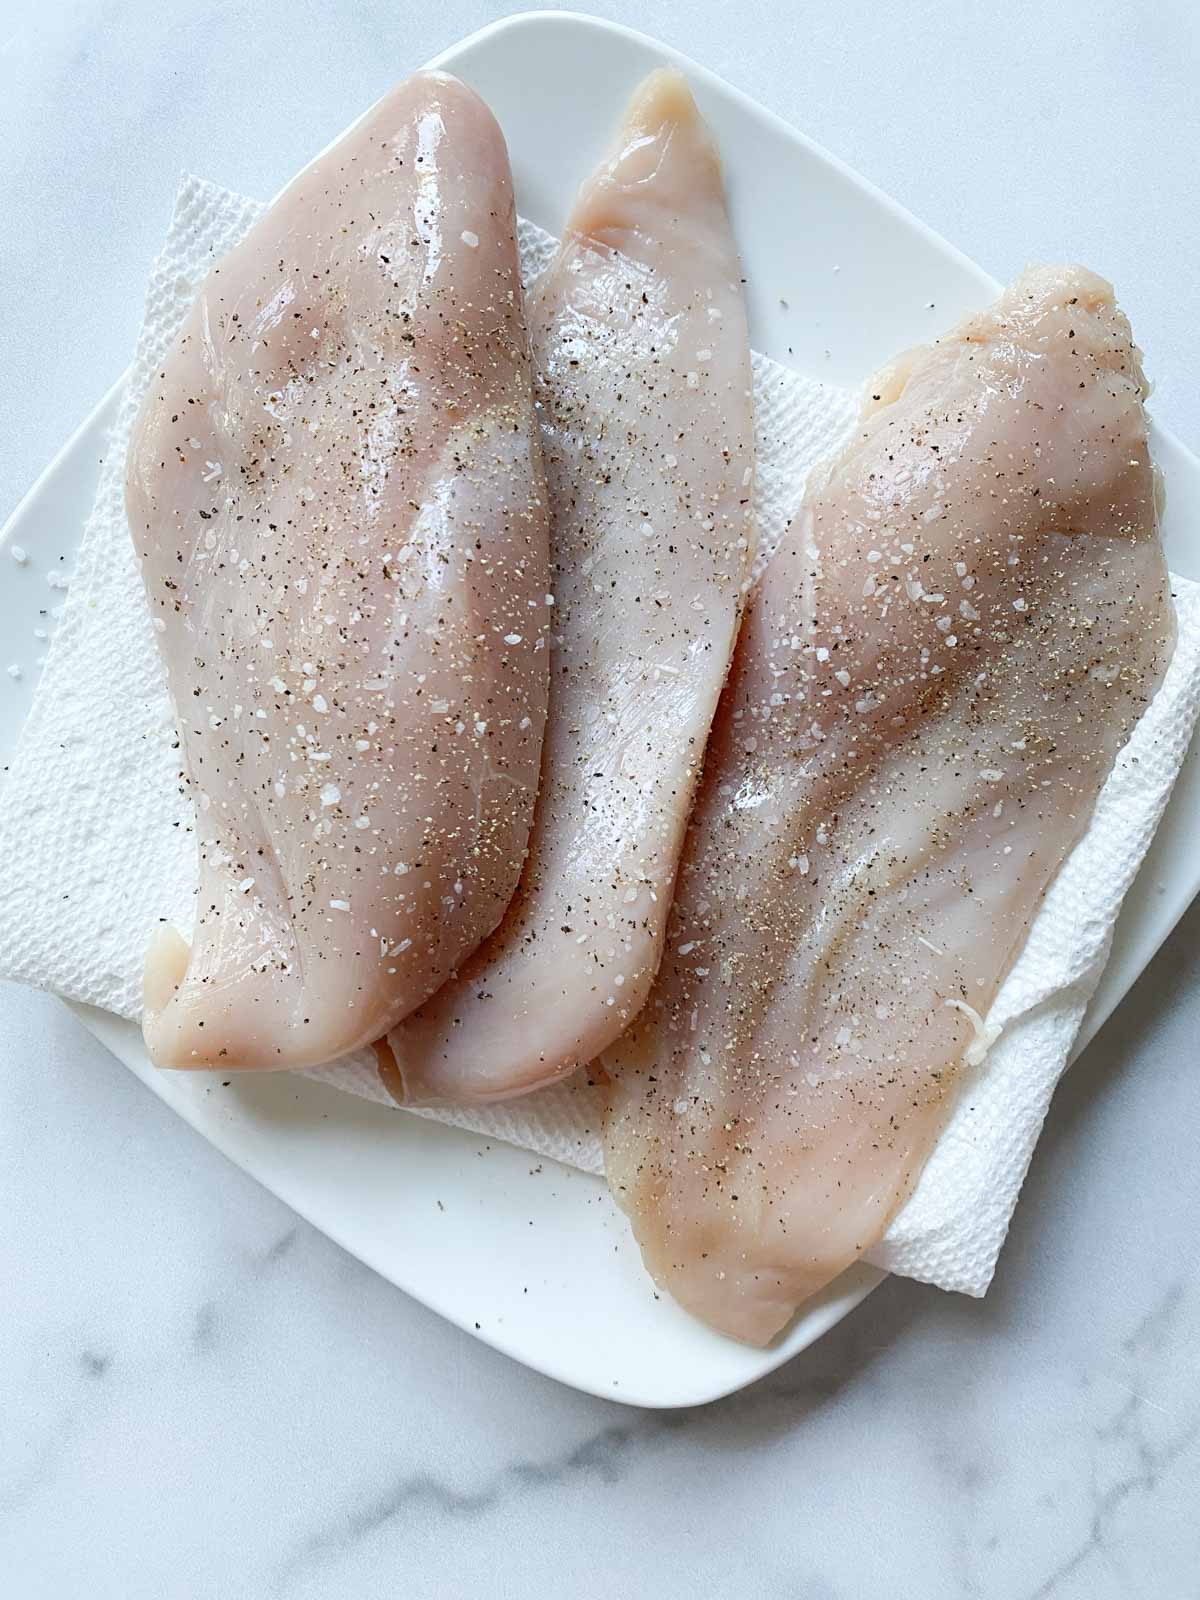 Raw chicken breasts seasoned on a plate.